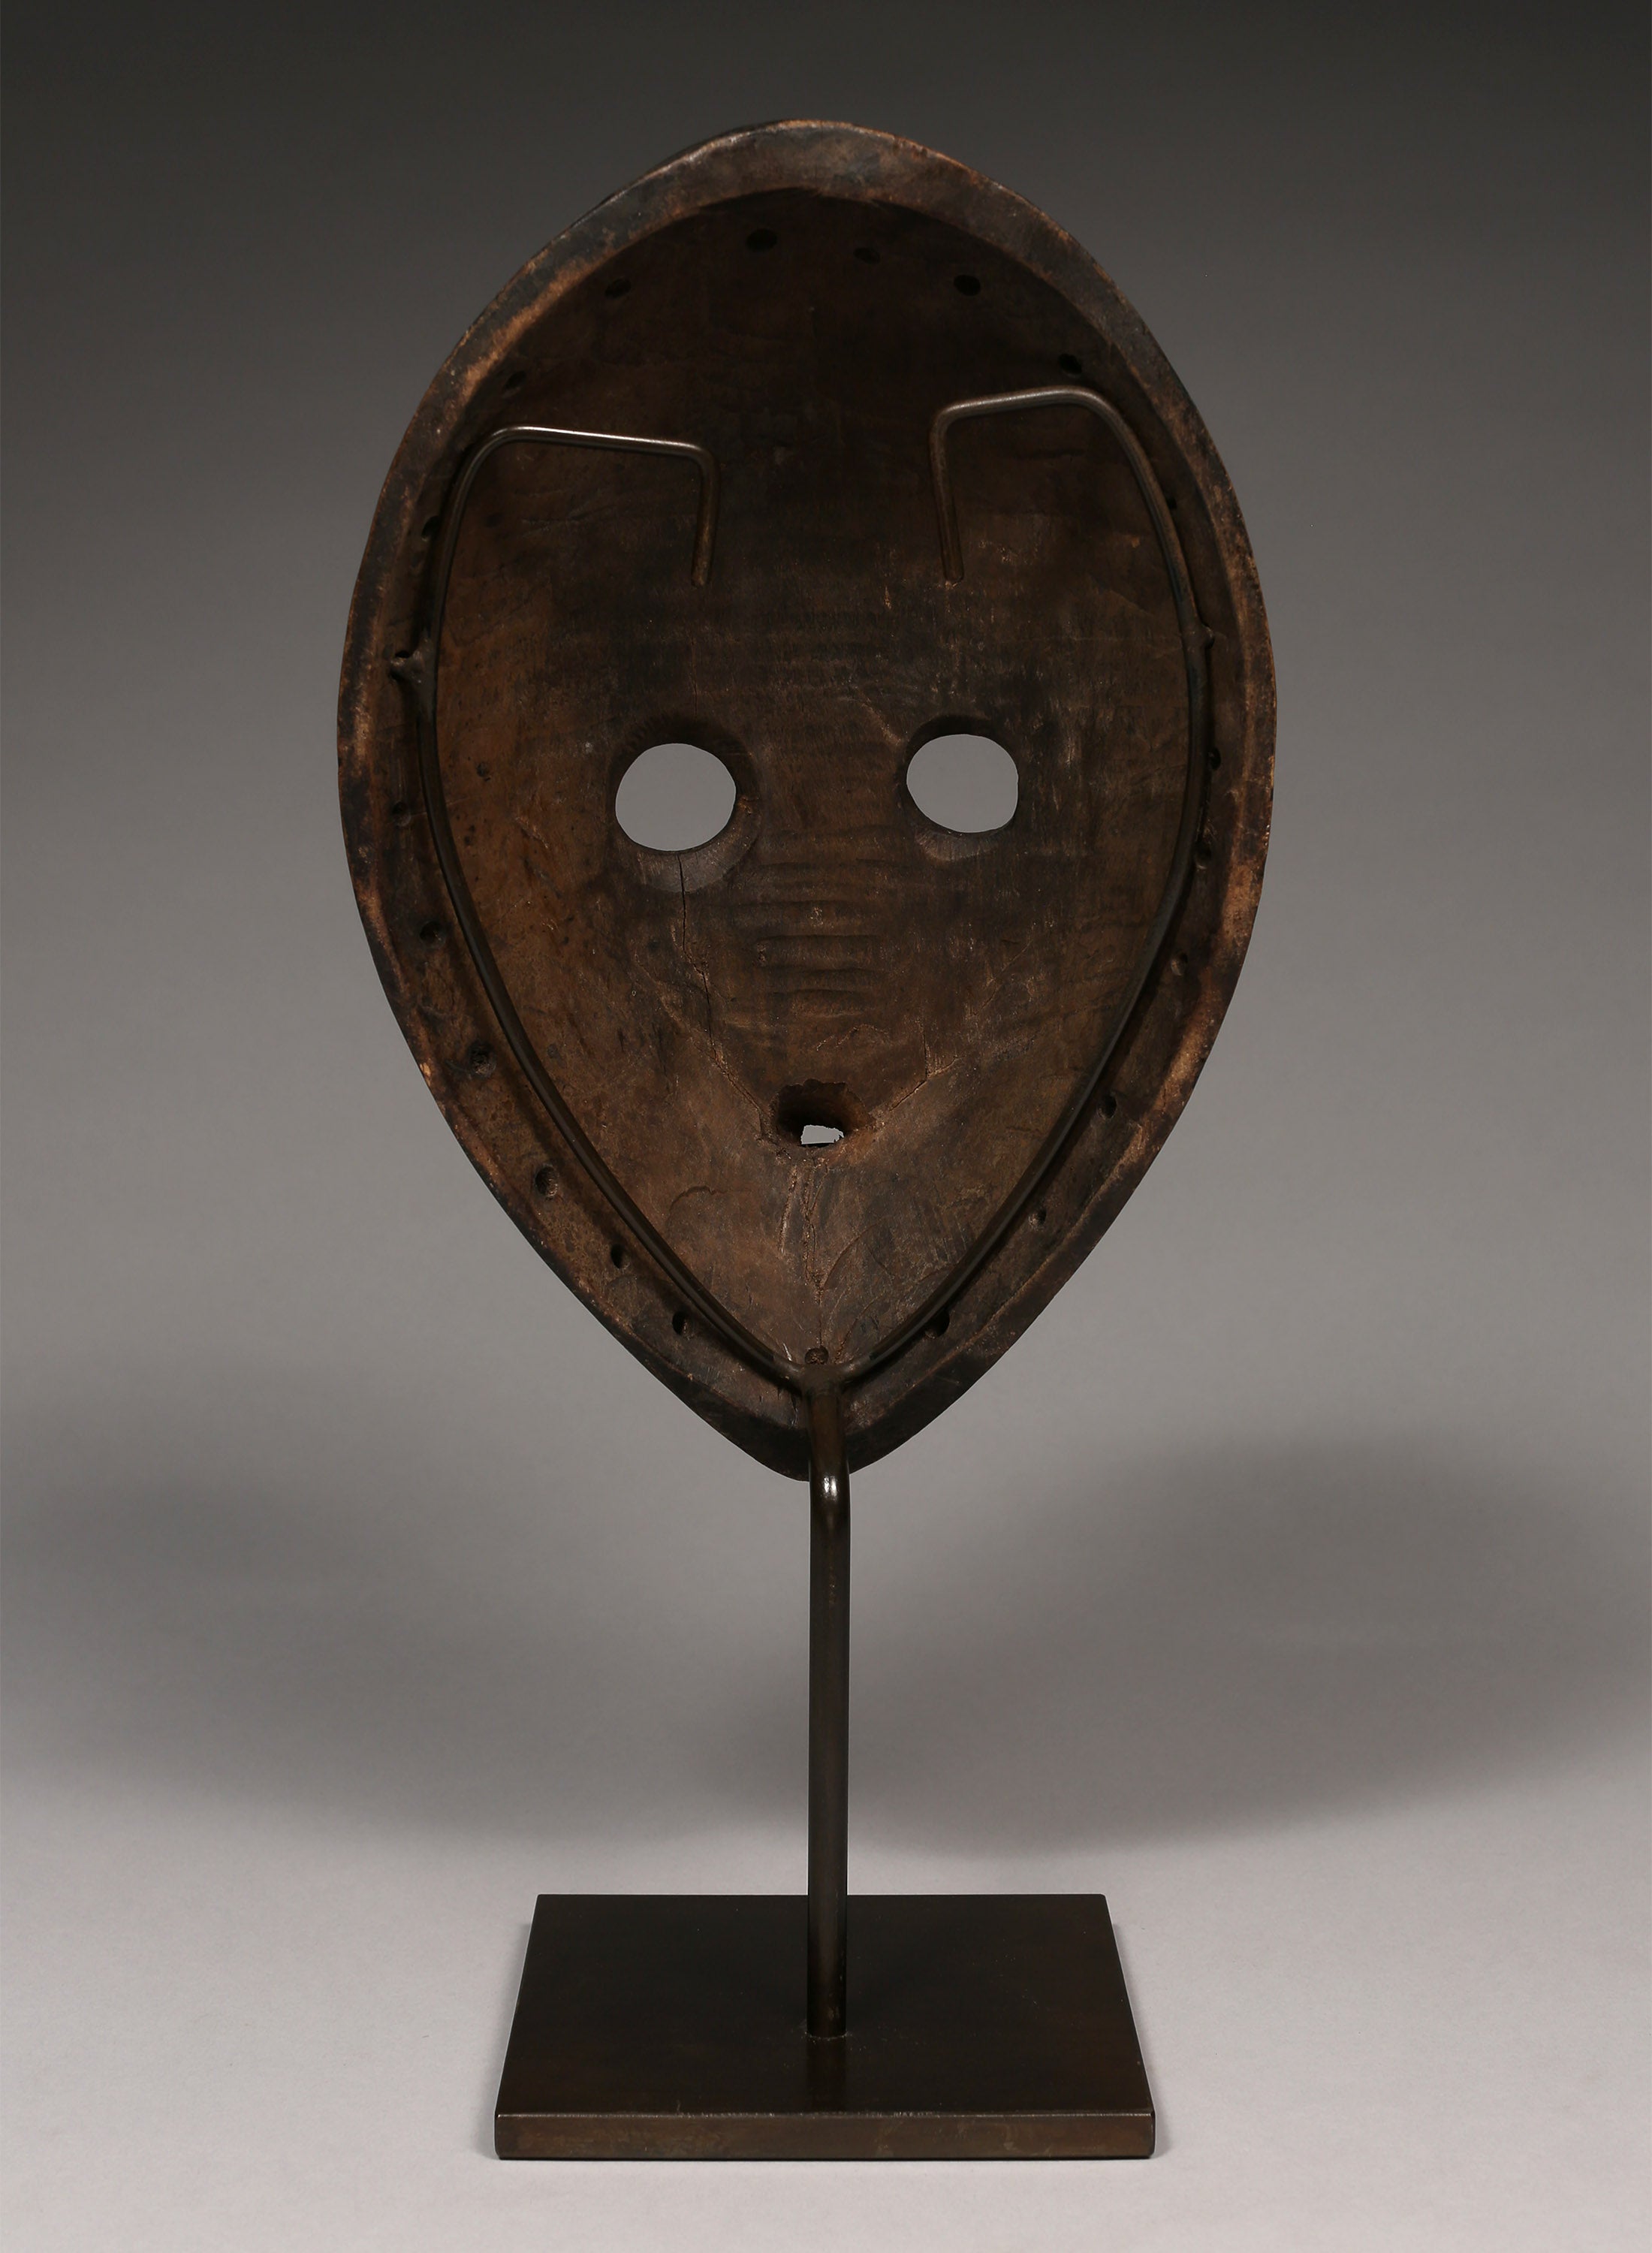 Tribal Masks - Handcrafted - Dan Masks - Traditional Folk Art - African Artifacts Sculptures - African Art Collector - This Gunye Ge mask from the Dan Tribe features exquisite wooden carving, capturing the distinctive artistry and cultural heritage of Africa. An impressive piece featuring intricate detail, it is sure to be a stunning addition to any art collection. H: 10.5